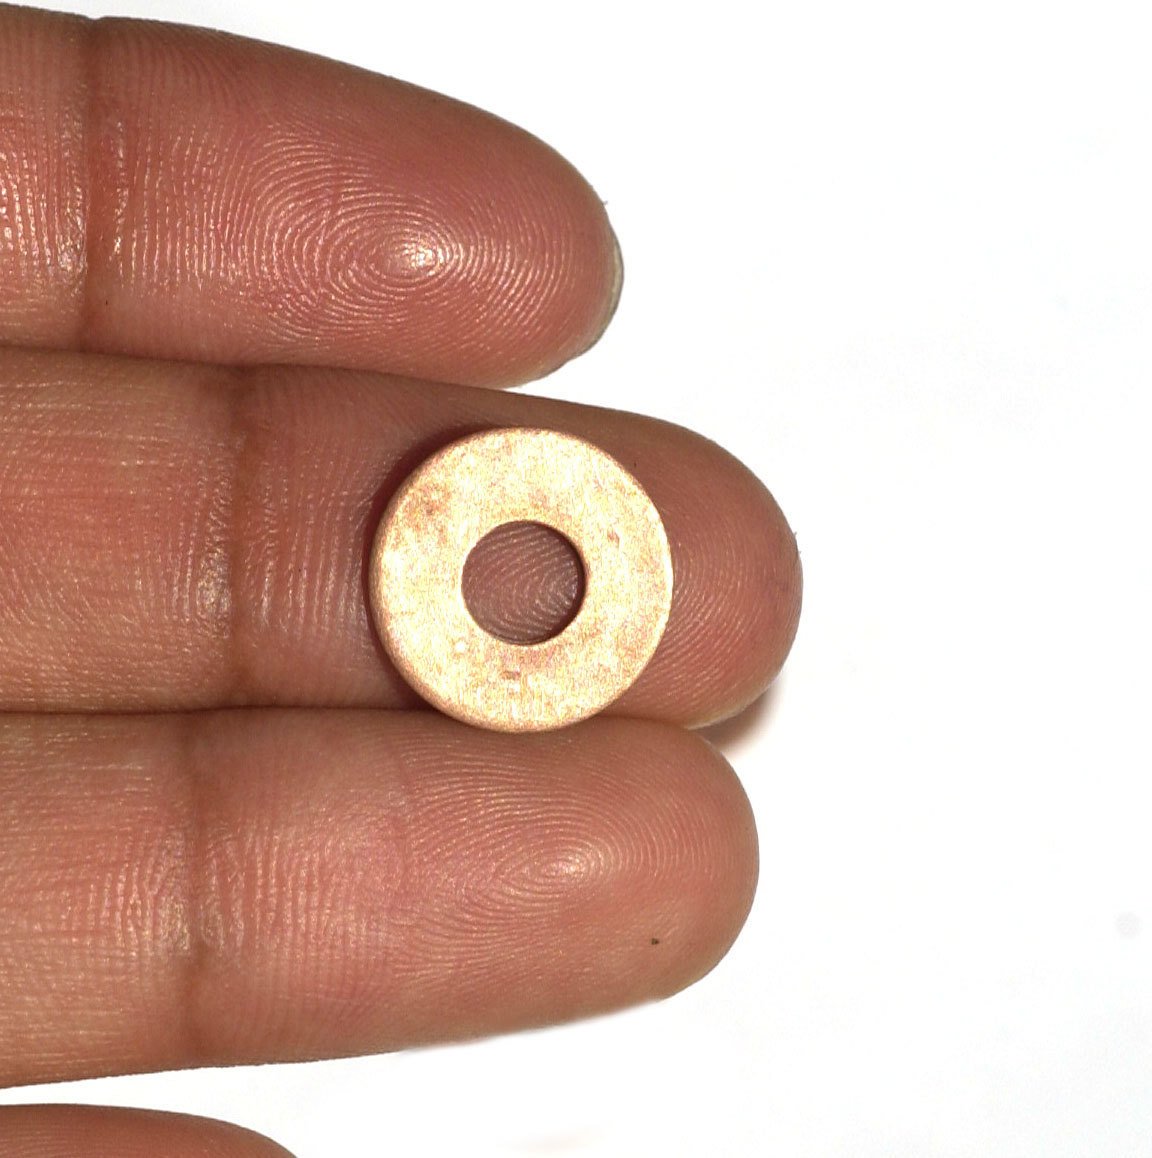 Donut Washer 13mm 20G Blanks Cutout for Enameling Stamping Texturing Solderin Blank, Jewelry Supplies - 8 pieces